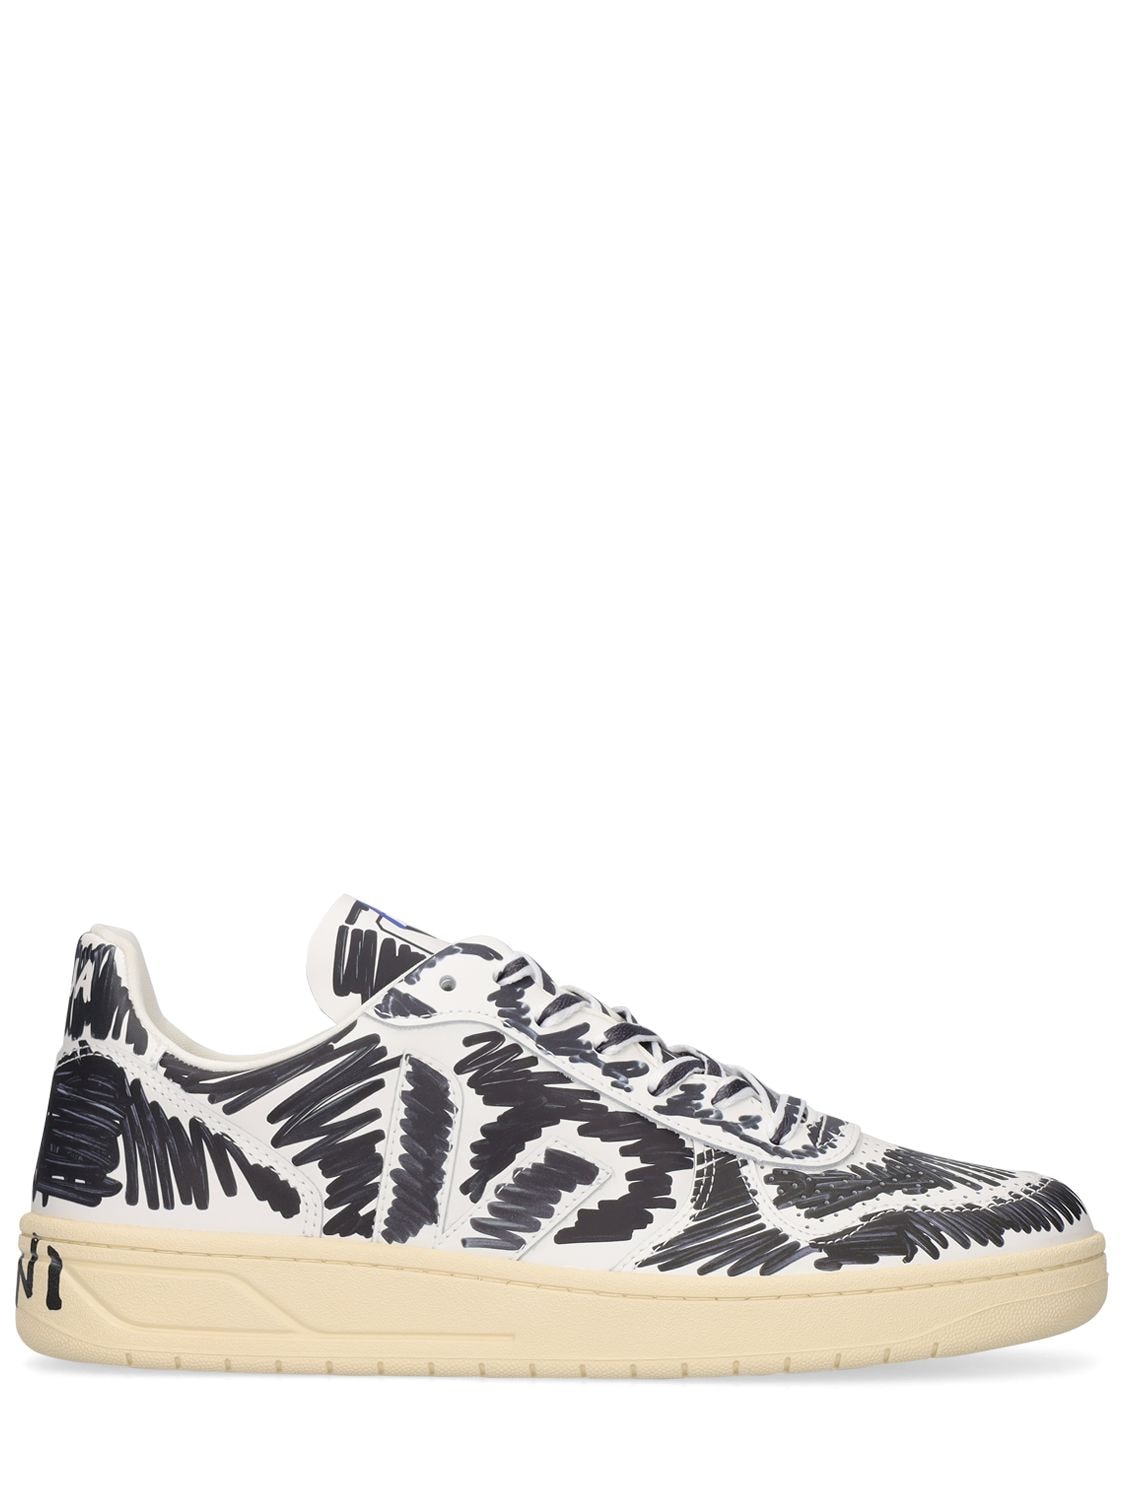 MARNI VEJA V-10 PRINTED LEATHER LOW trainers